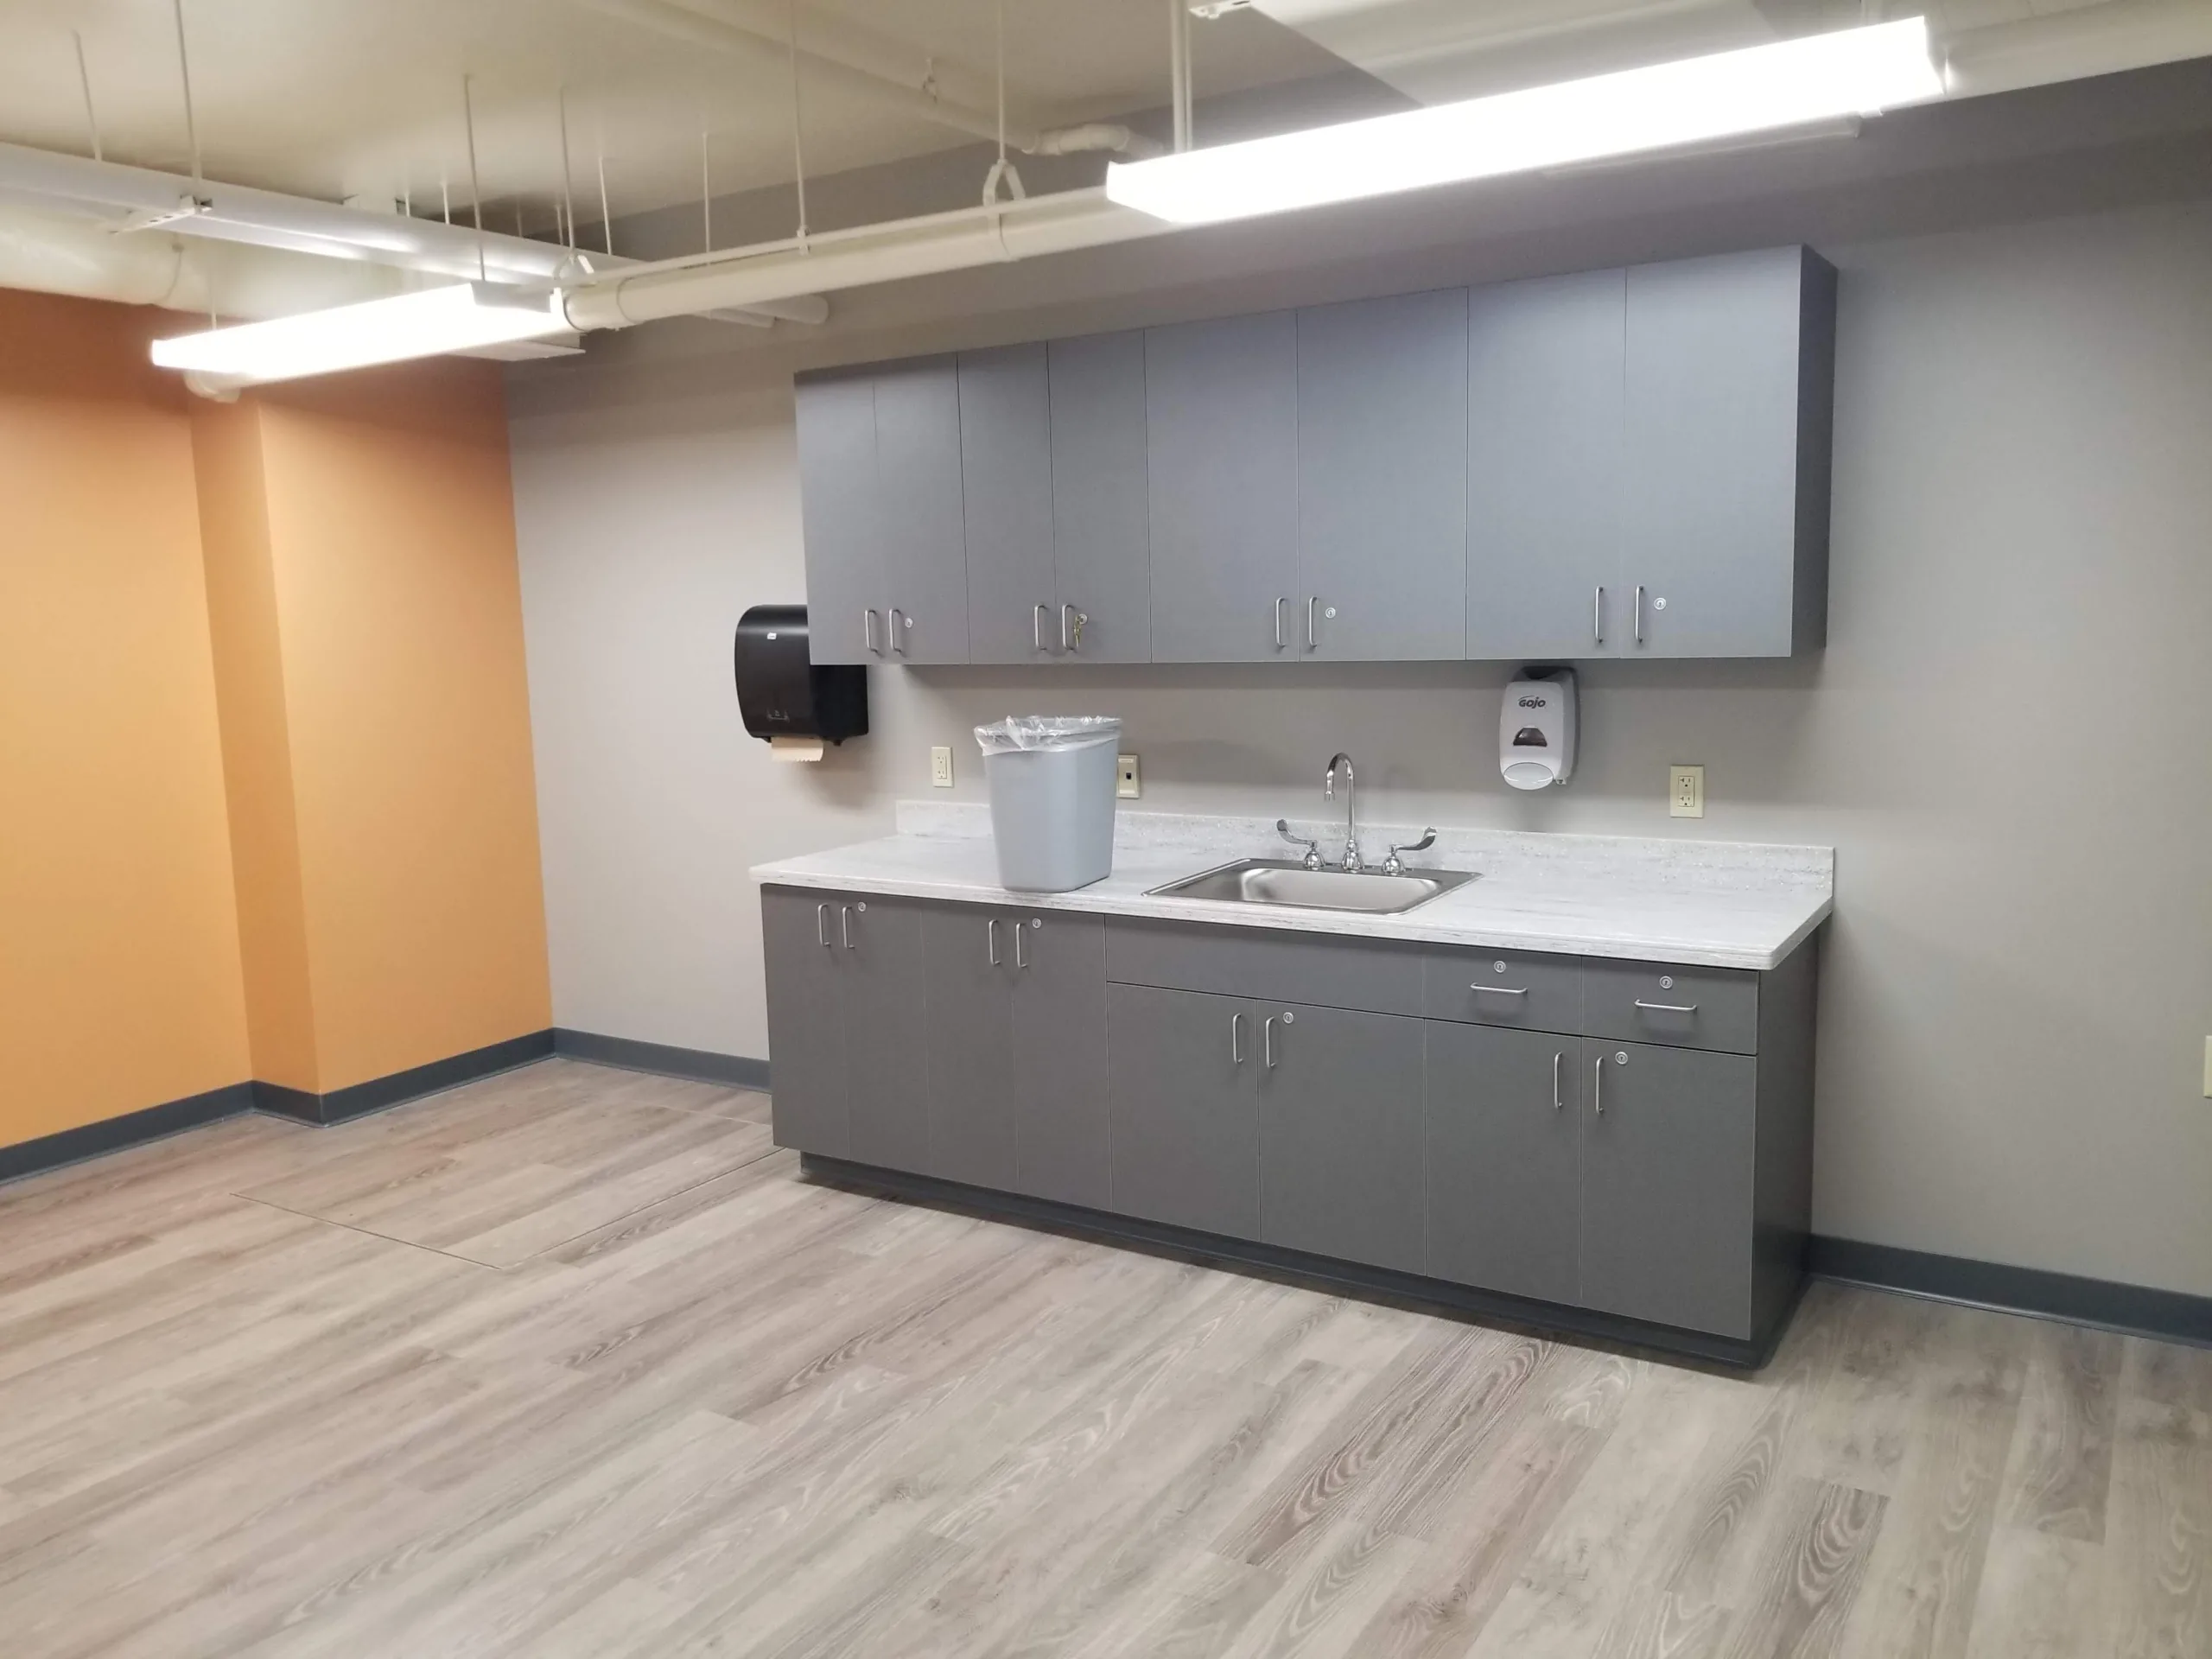 Julian Thomas Health Clinic cabinets and sink